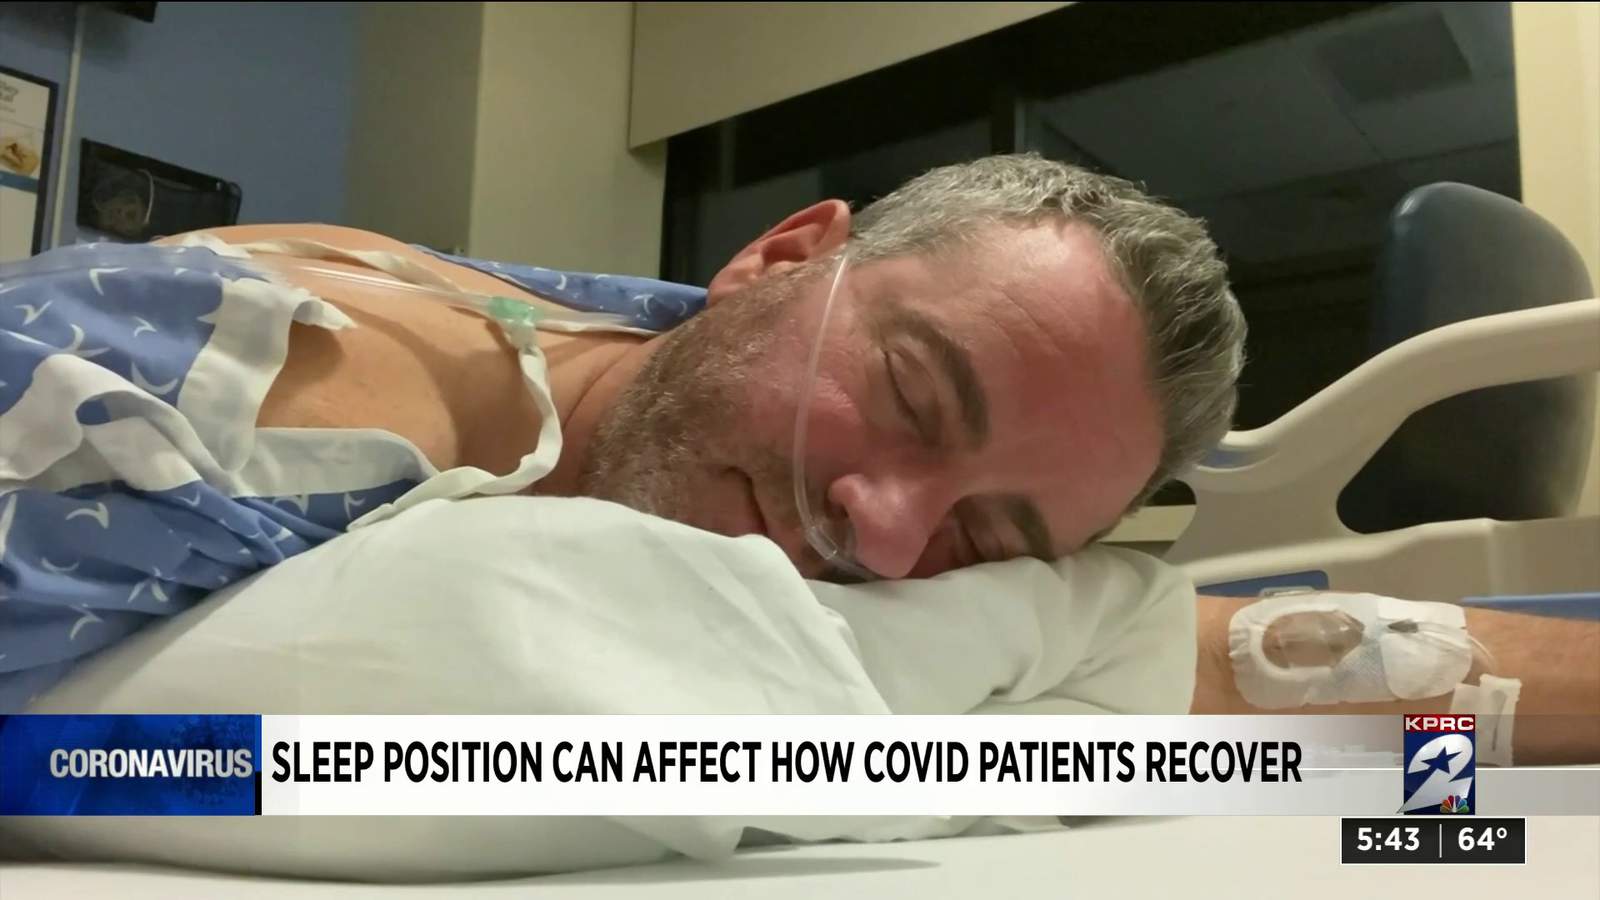 Why being face down is helping COVID-19 patients